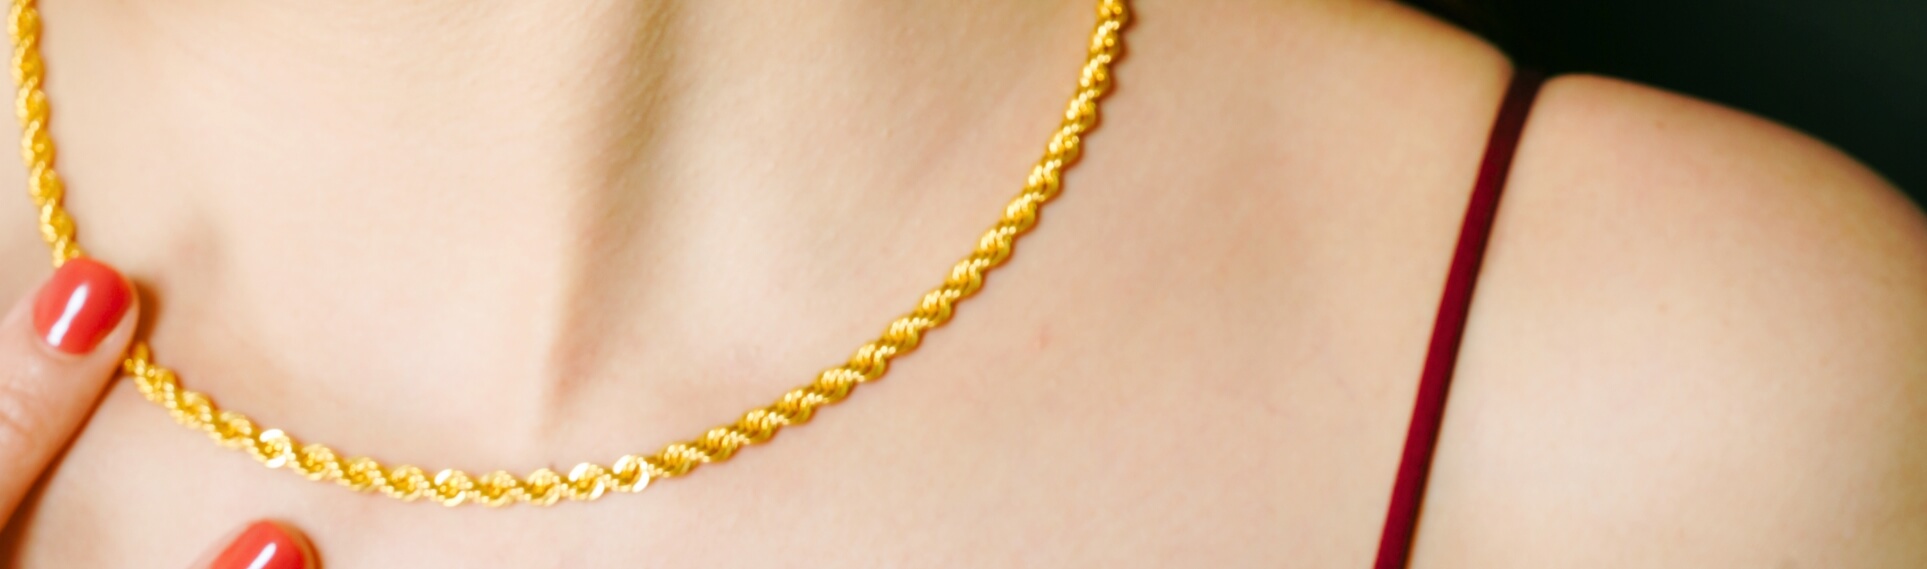 necklace gold chain jewelry in singapore improve your gold jewellery style